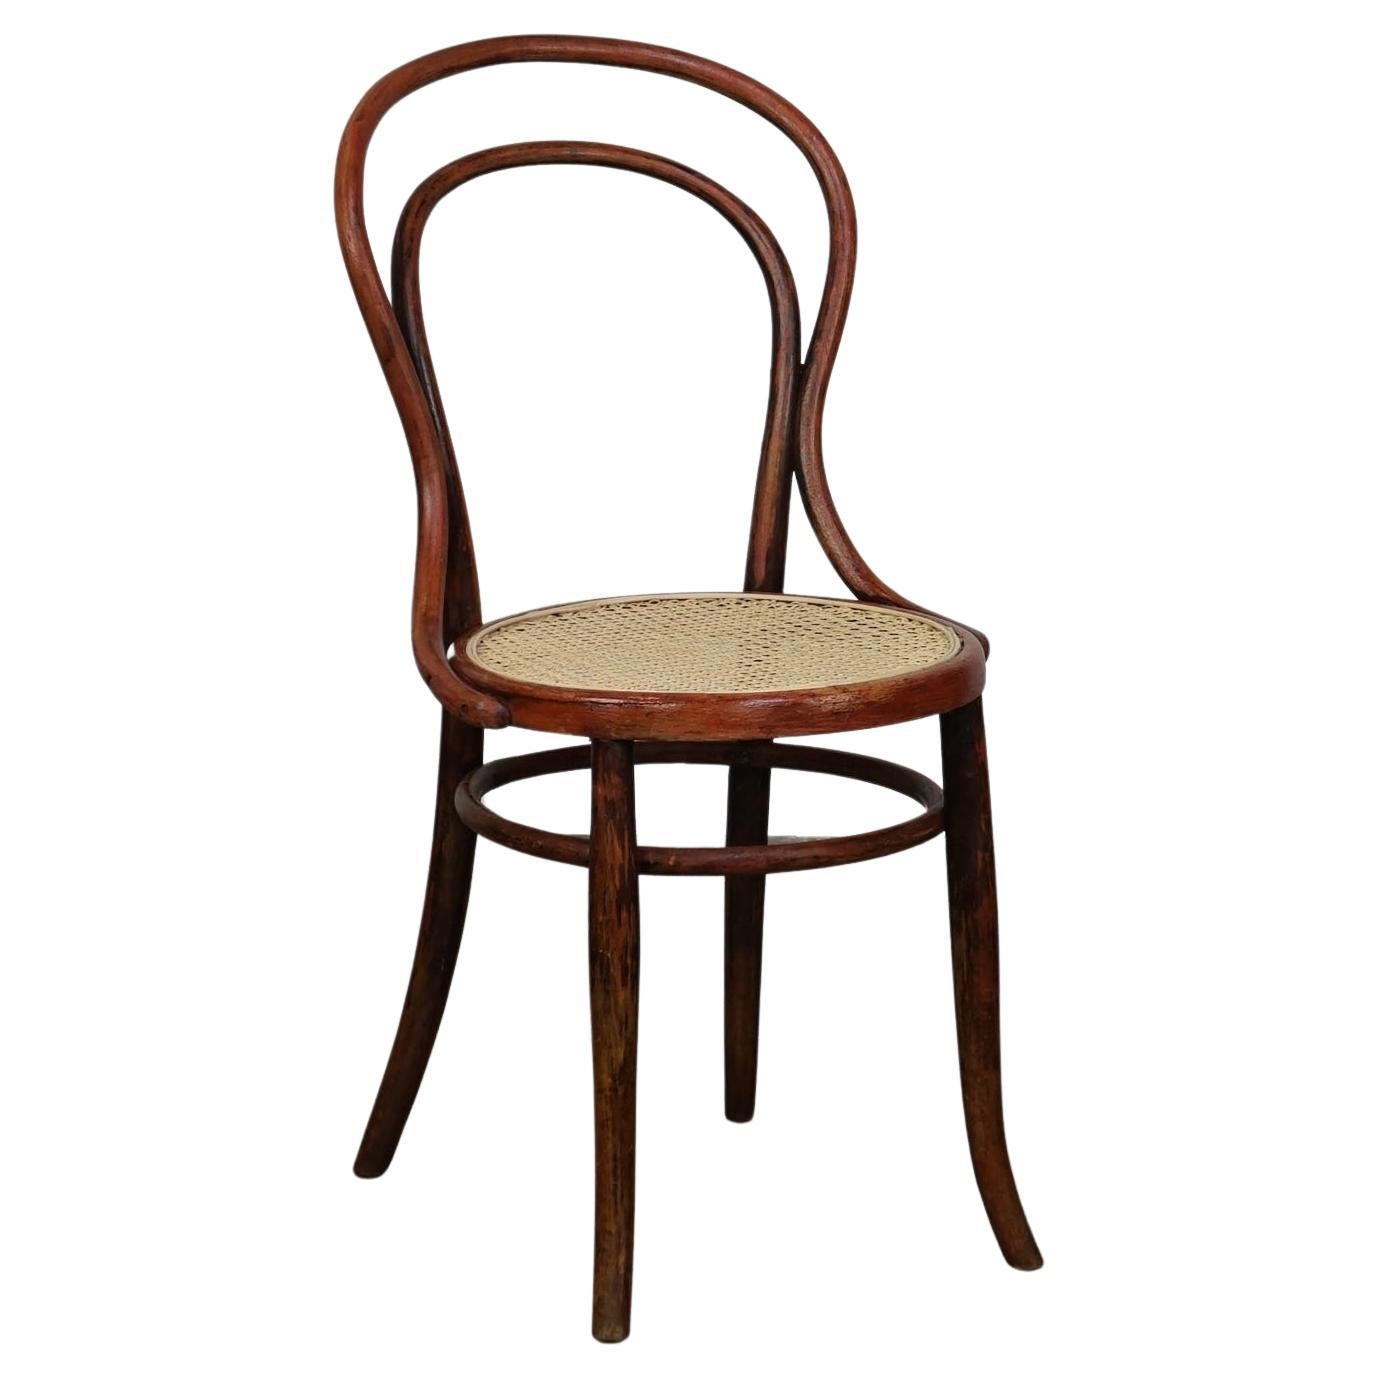 Original antique Thonet chair no. 14 with a beautiful patina and a new matte sea For Sale